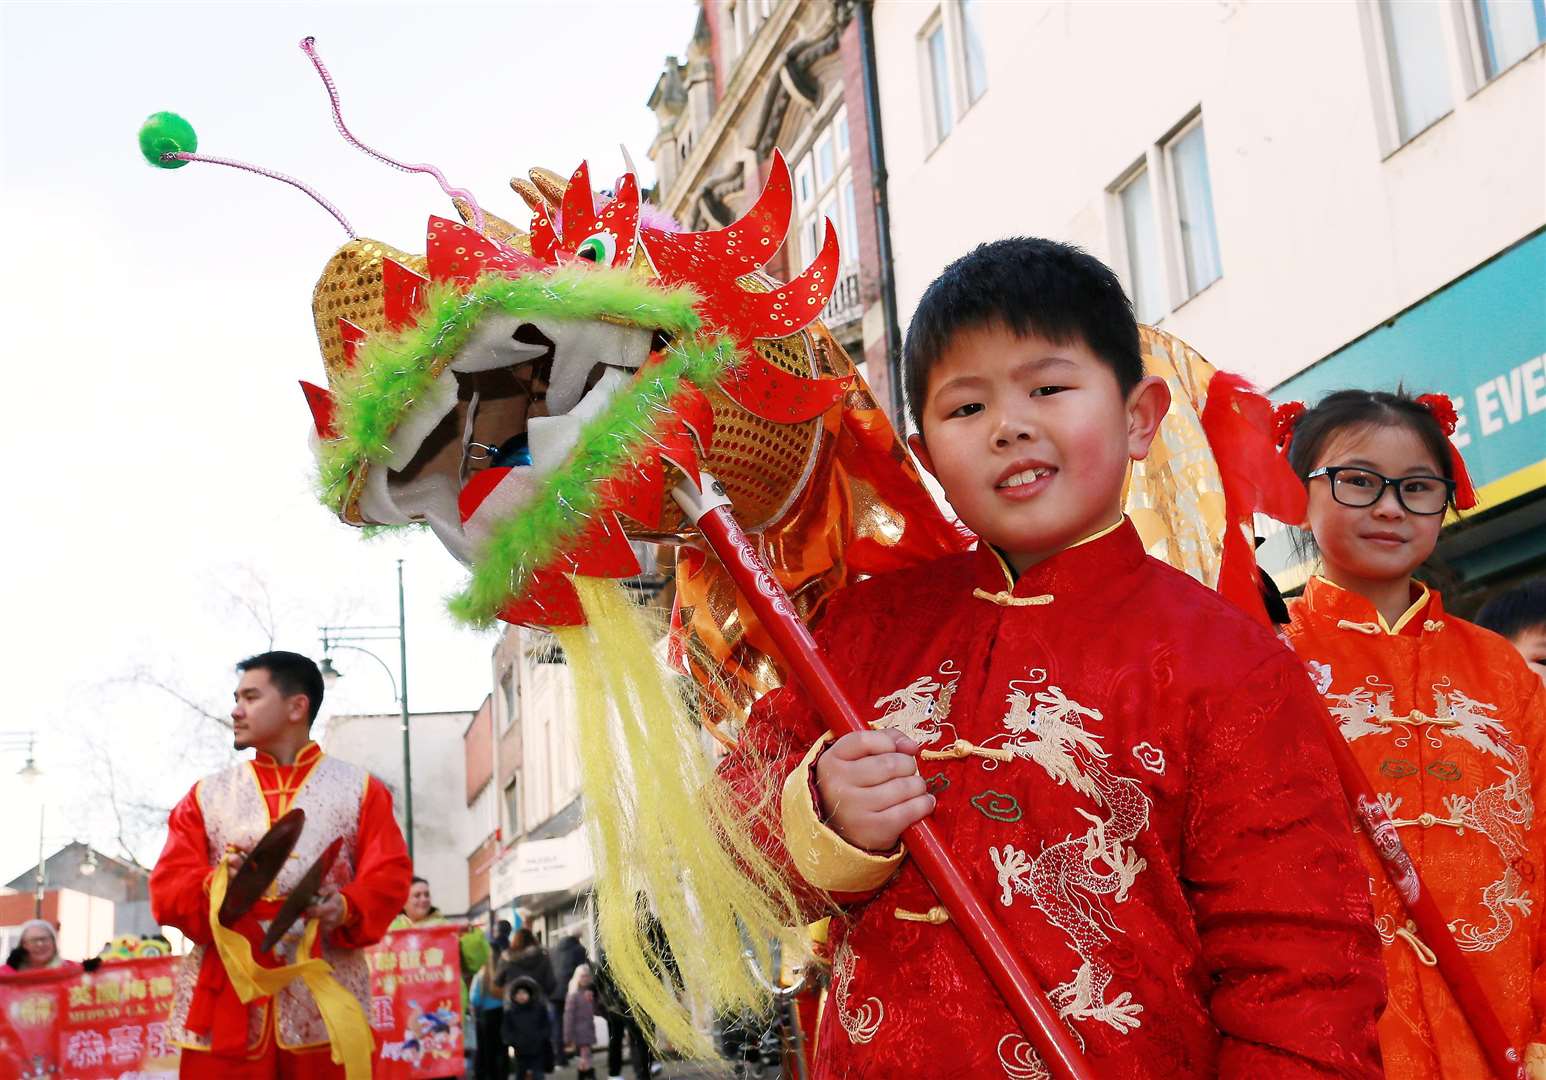 Celebrations have been taking place across Kent for Chinese New Year